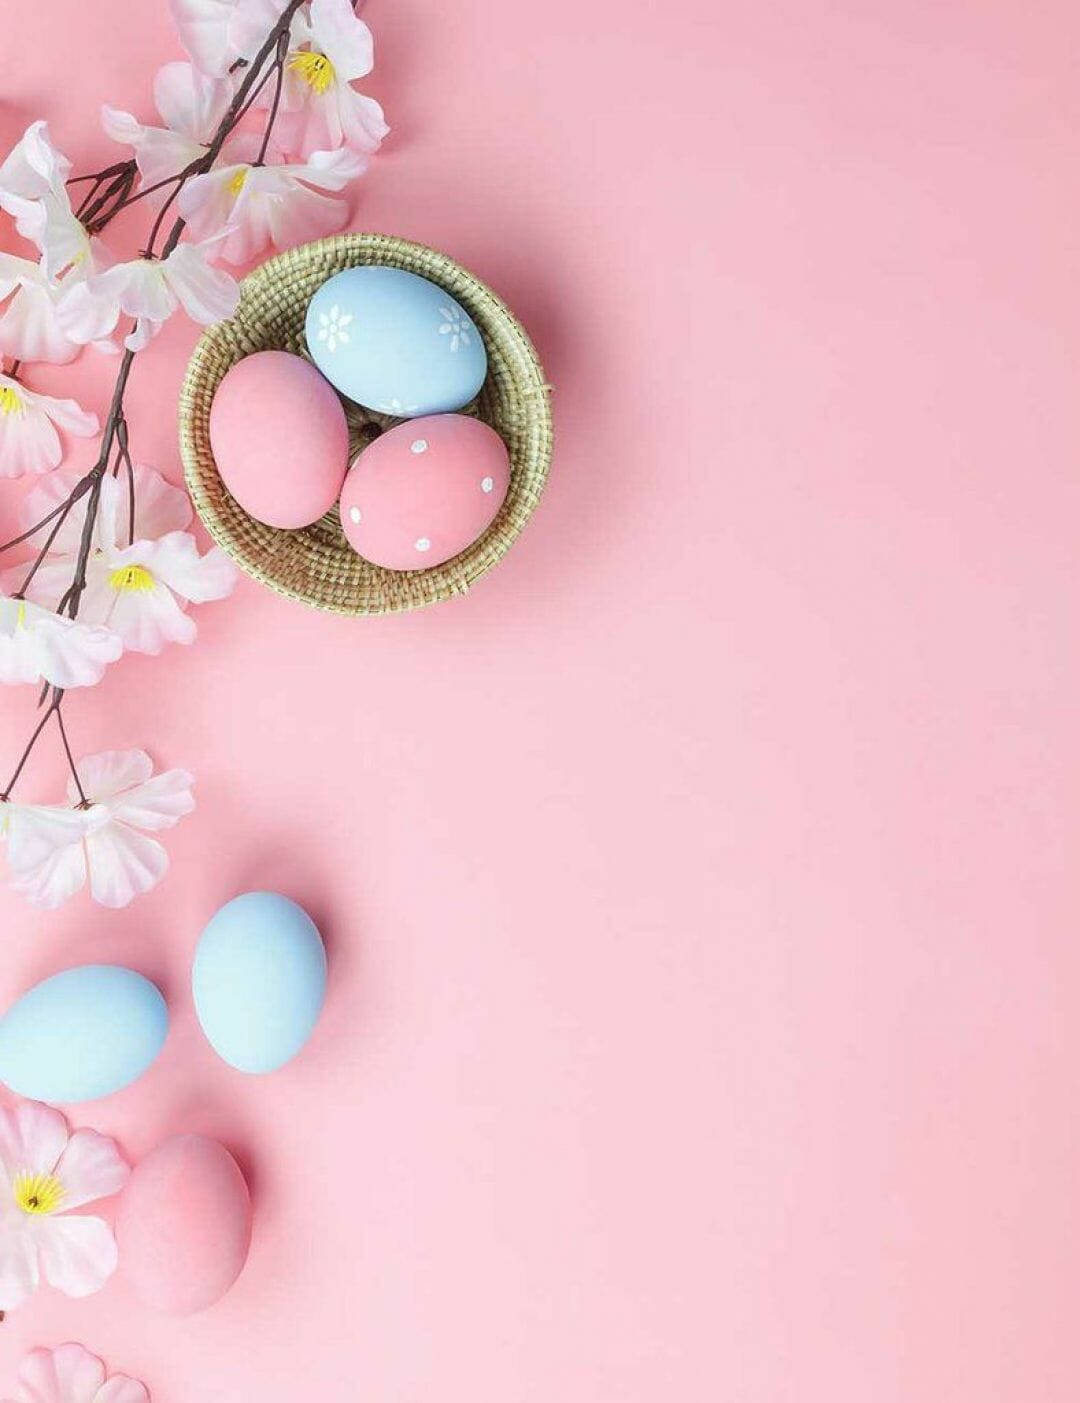 Easter Eggs On Pink Background With Cherry Blossoms Wallpaper